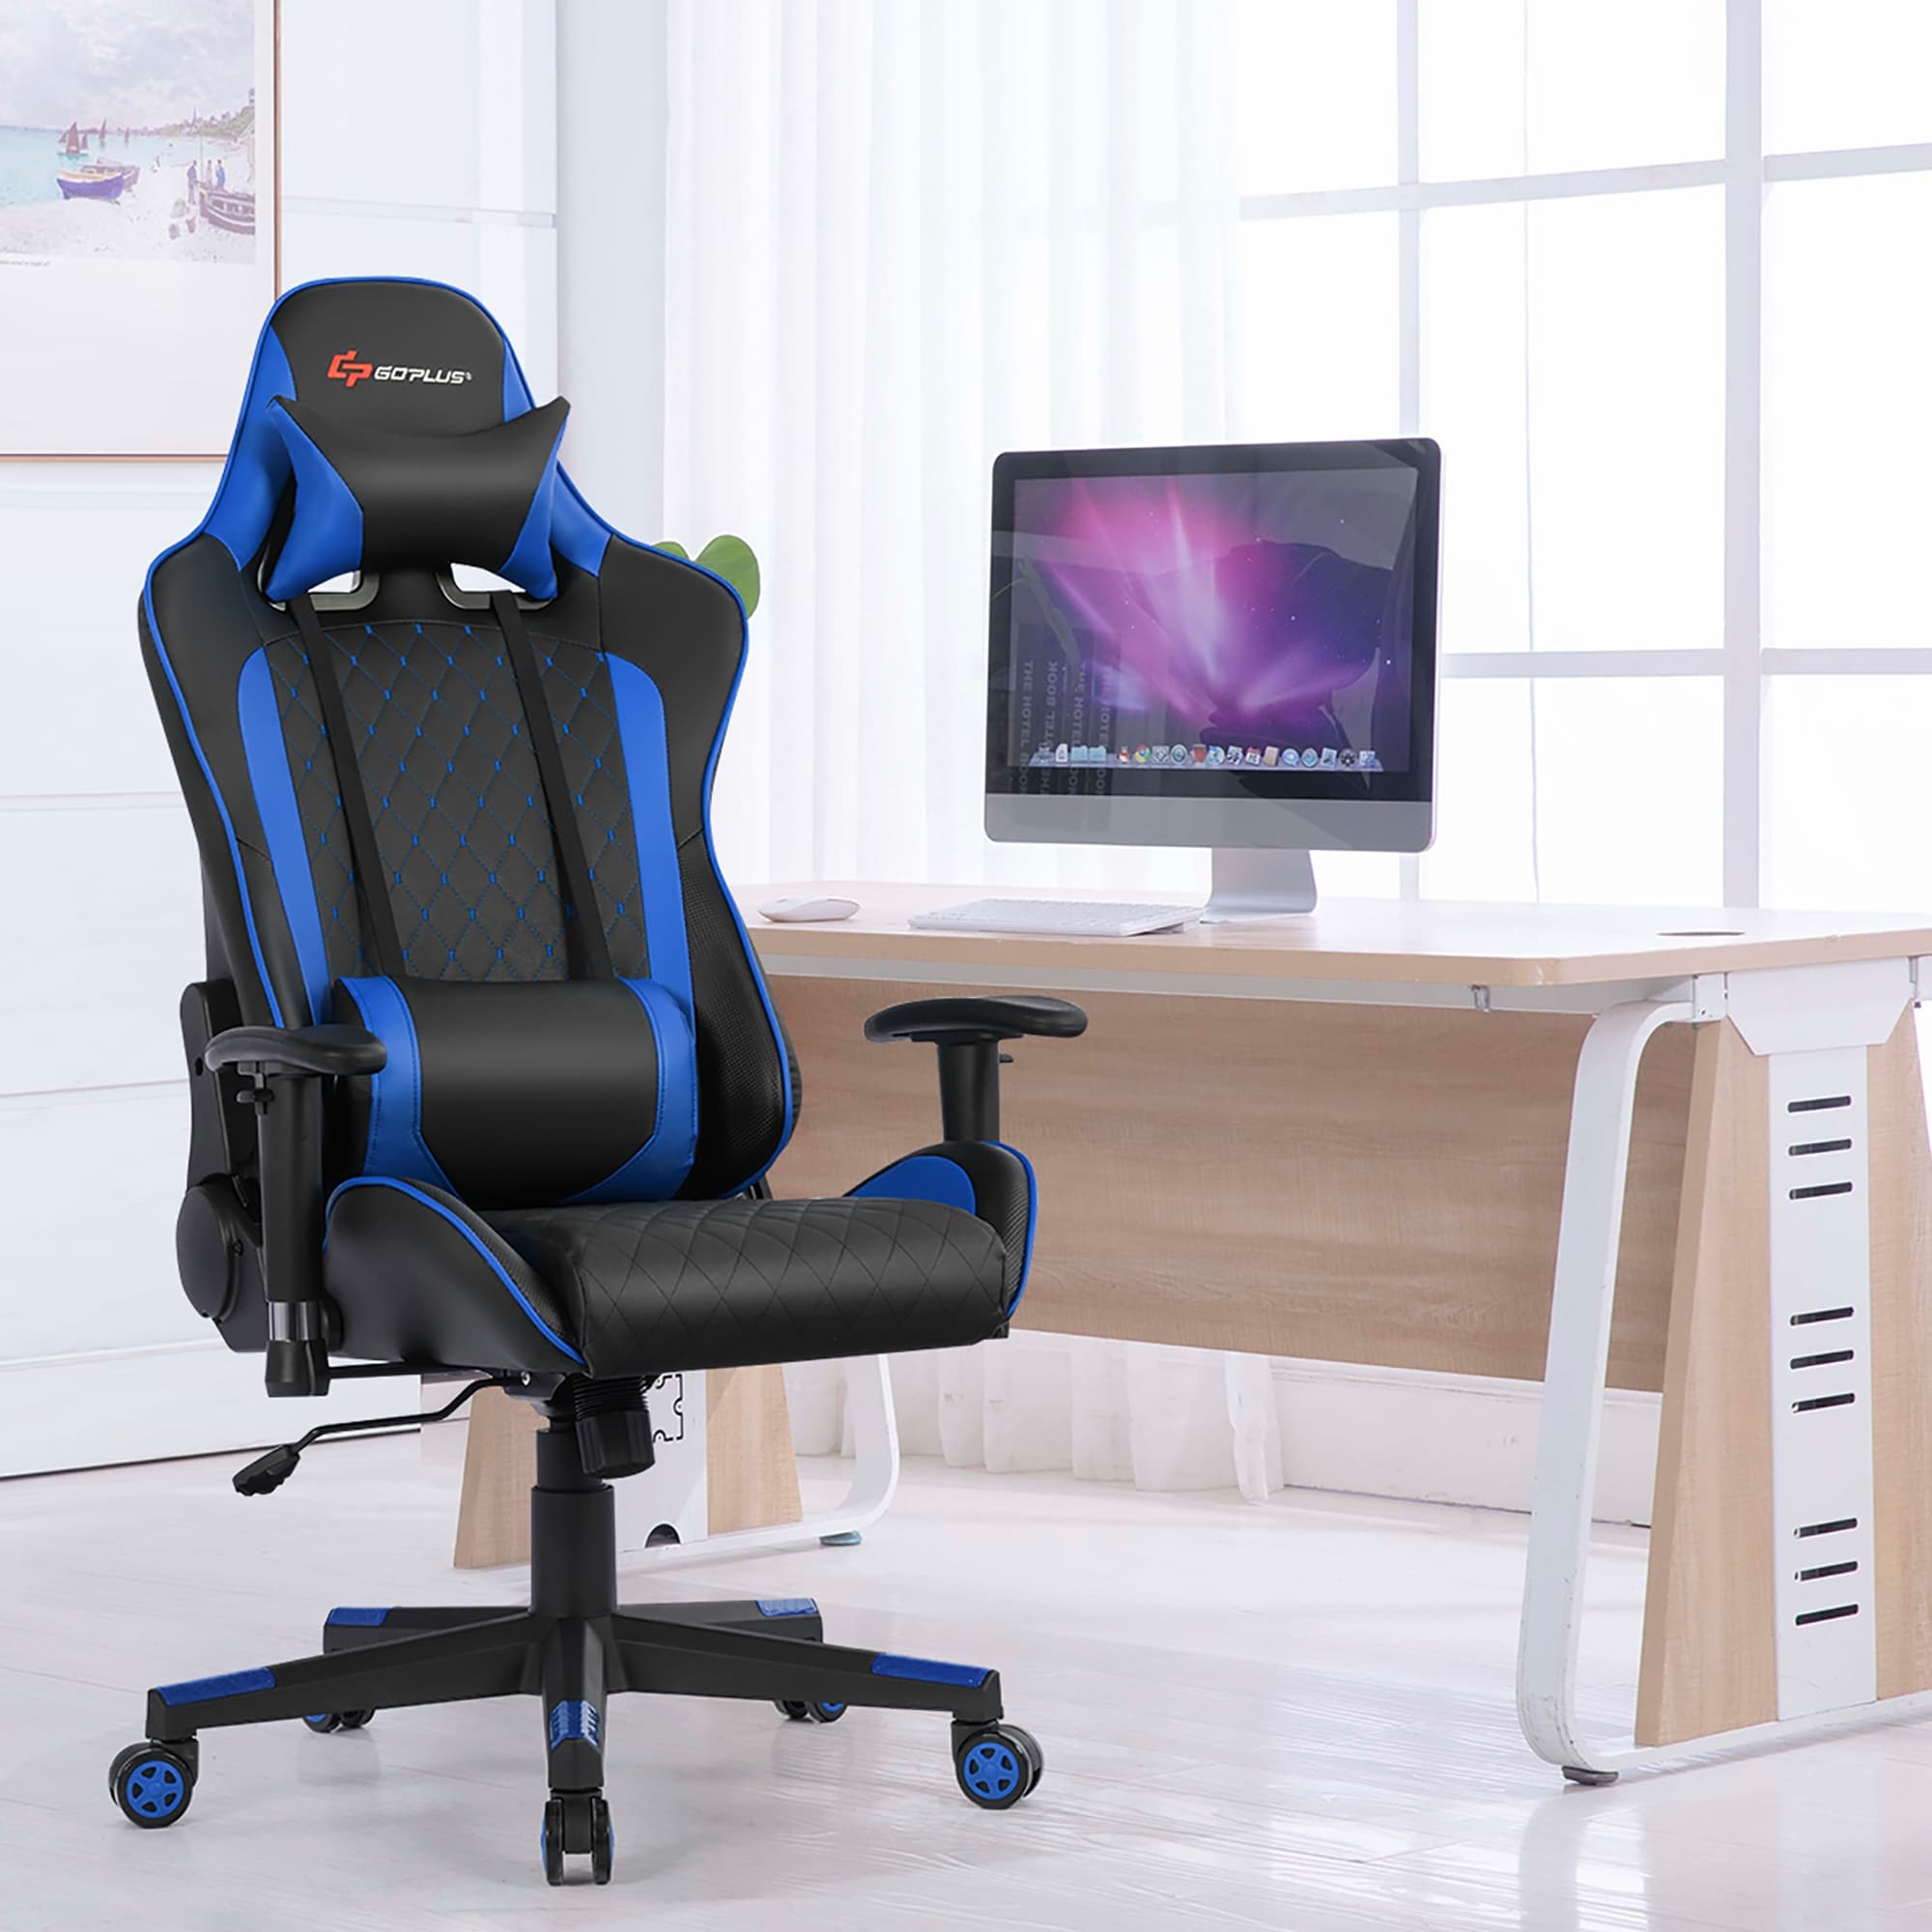 https://ak1.ostkcdn.com/images/products/is/images/direct/a74ed0fb6eb06af0c8a73ee1f512af833a9391ea/Gaming-Chair-Massage-Office-Chair-Computer-Gaming-Racing-Chair.jpg